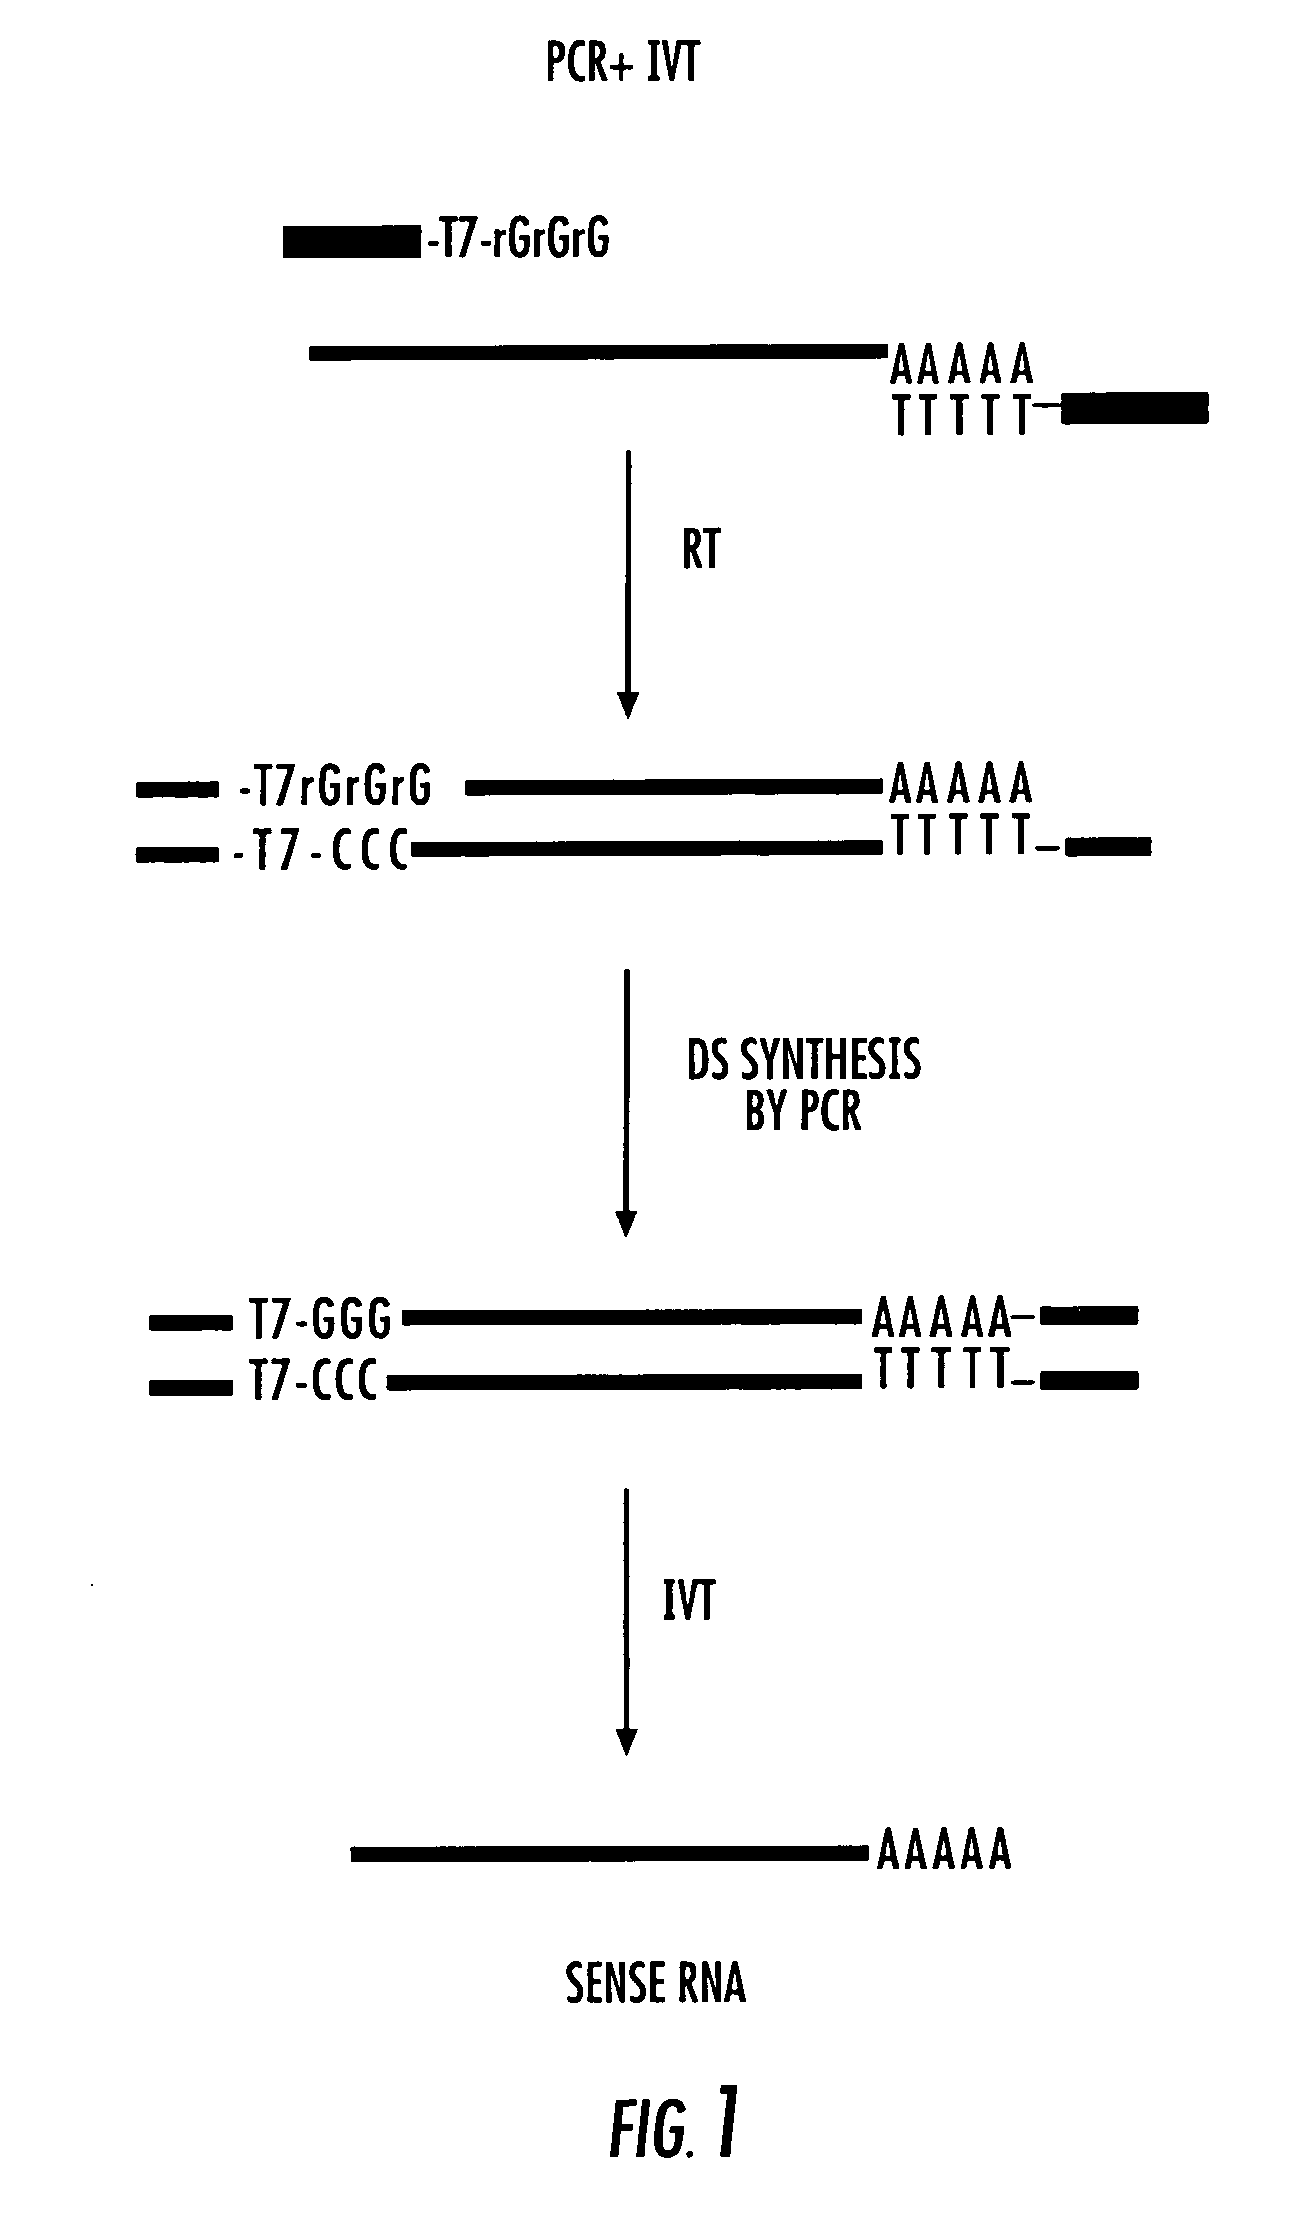 Low cycle amplification of RNA molecules